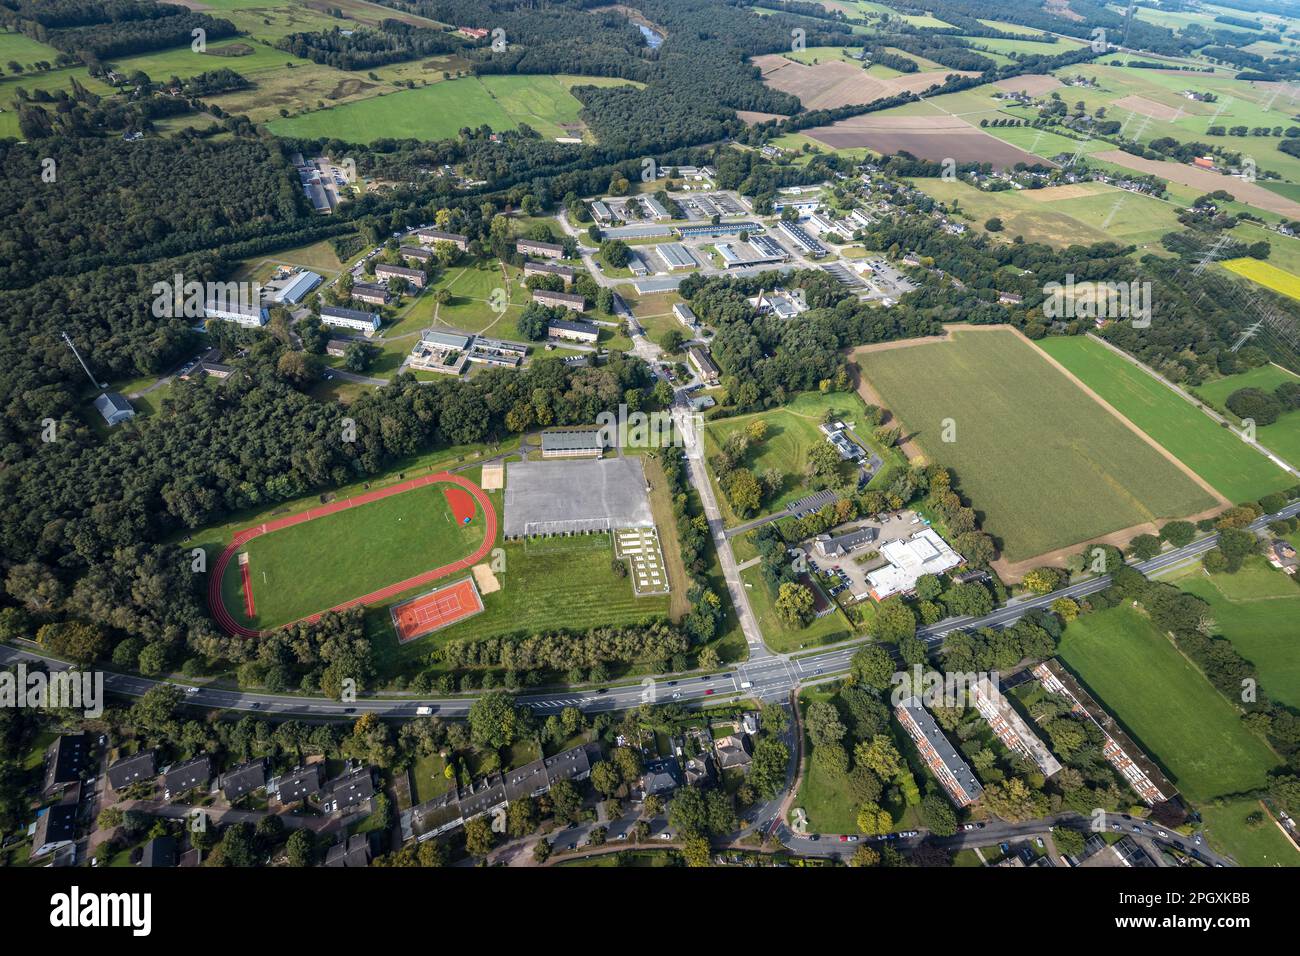 Aerial view, Schill barracks with sports field in the district Blumenkamp in Wesel, Lower Rhine, North Rhine-Westphalia, Germany, DE, Europe, soccer f Stock Photo